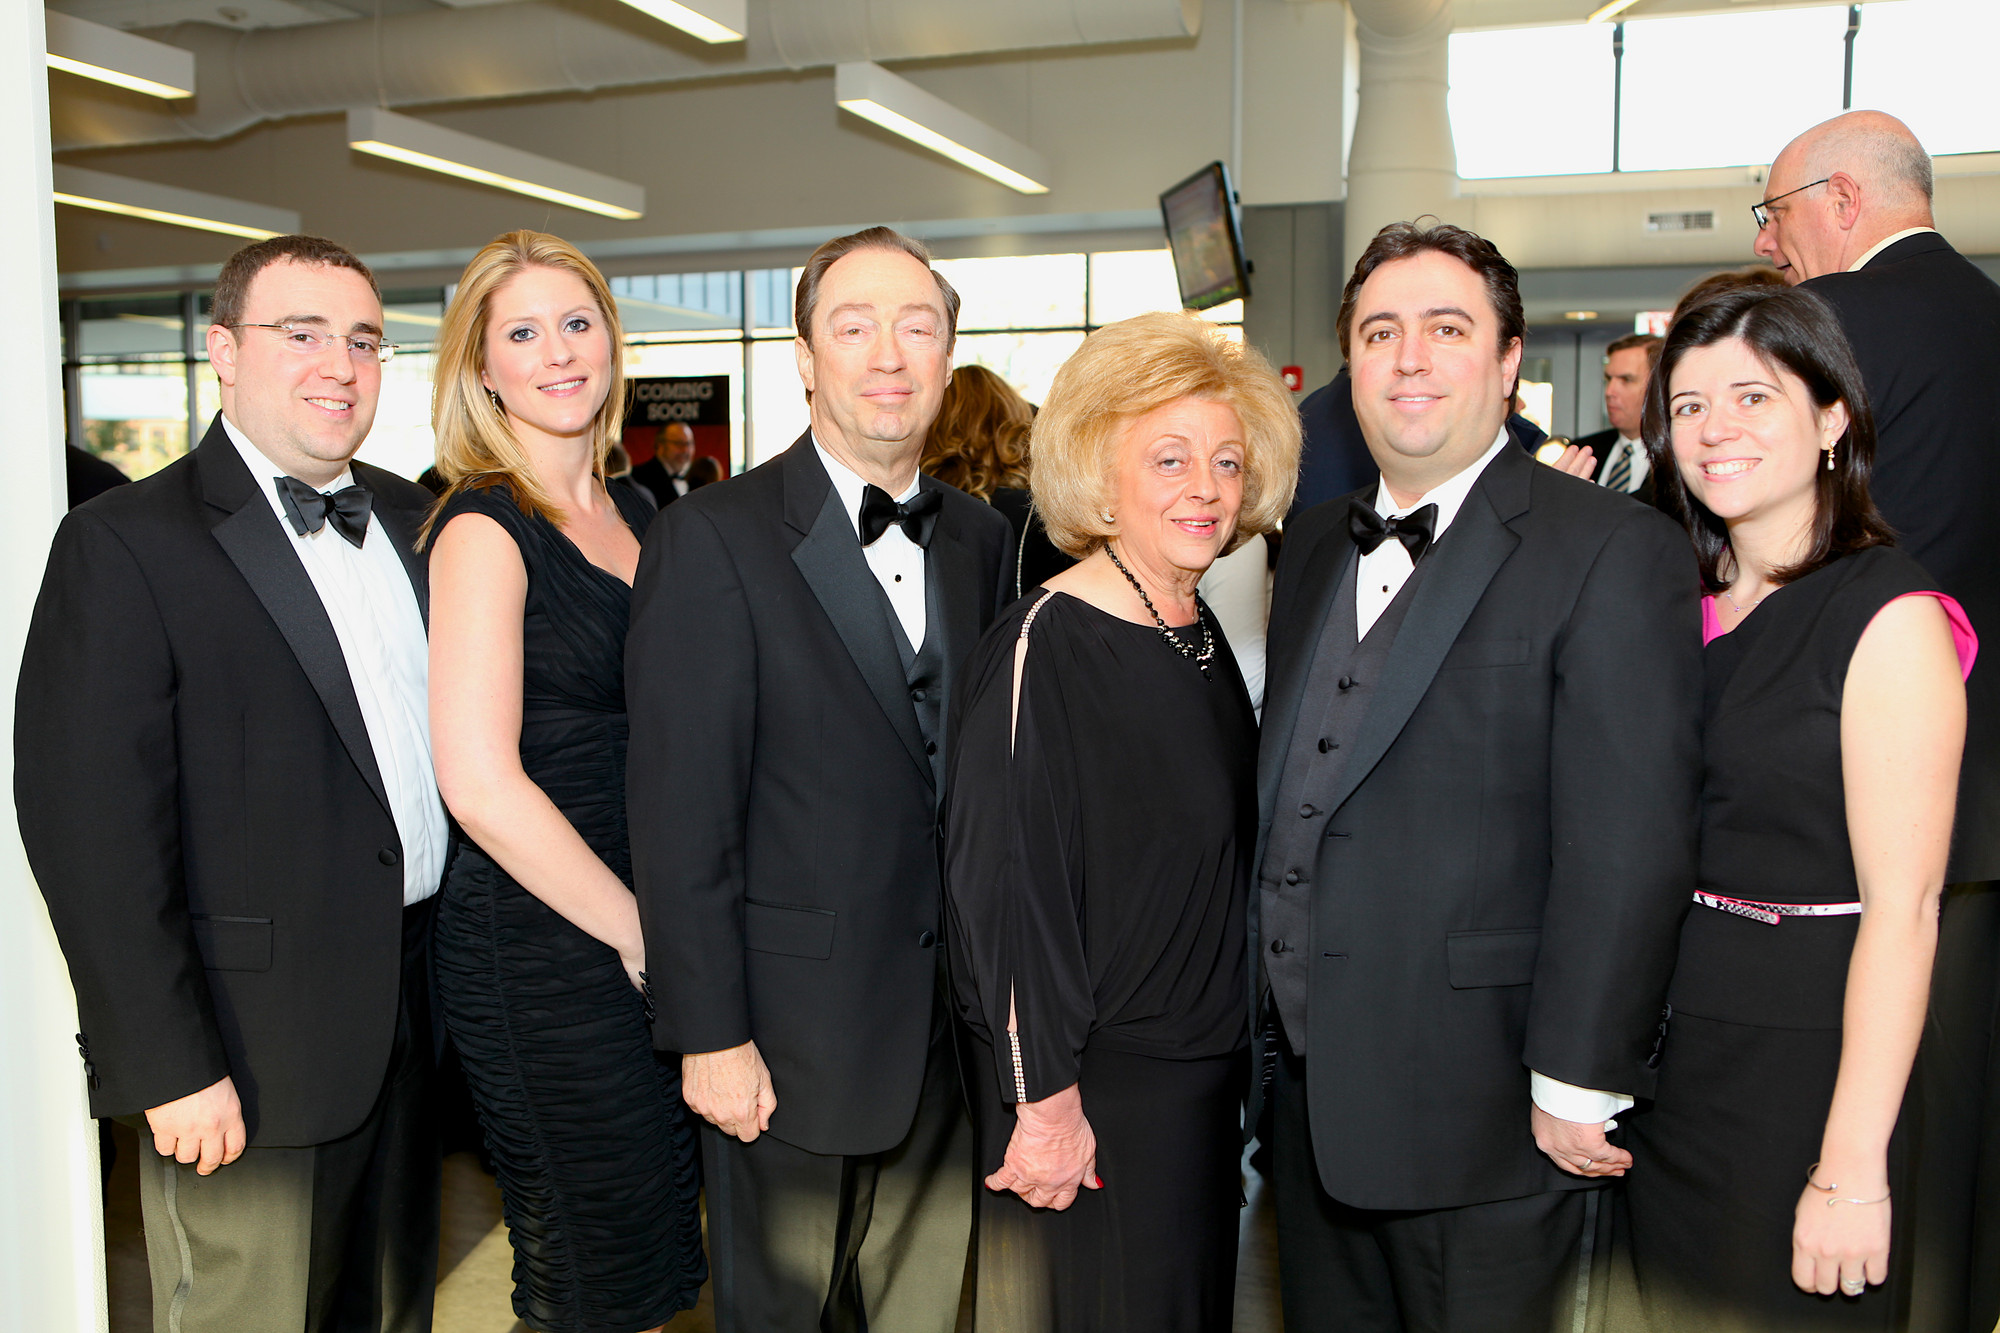 Honoree Joan Waldman, center, with her family at the event.